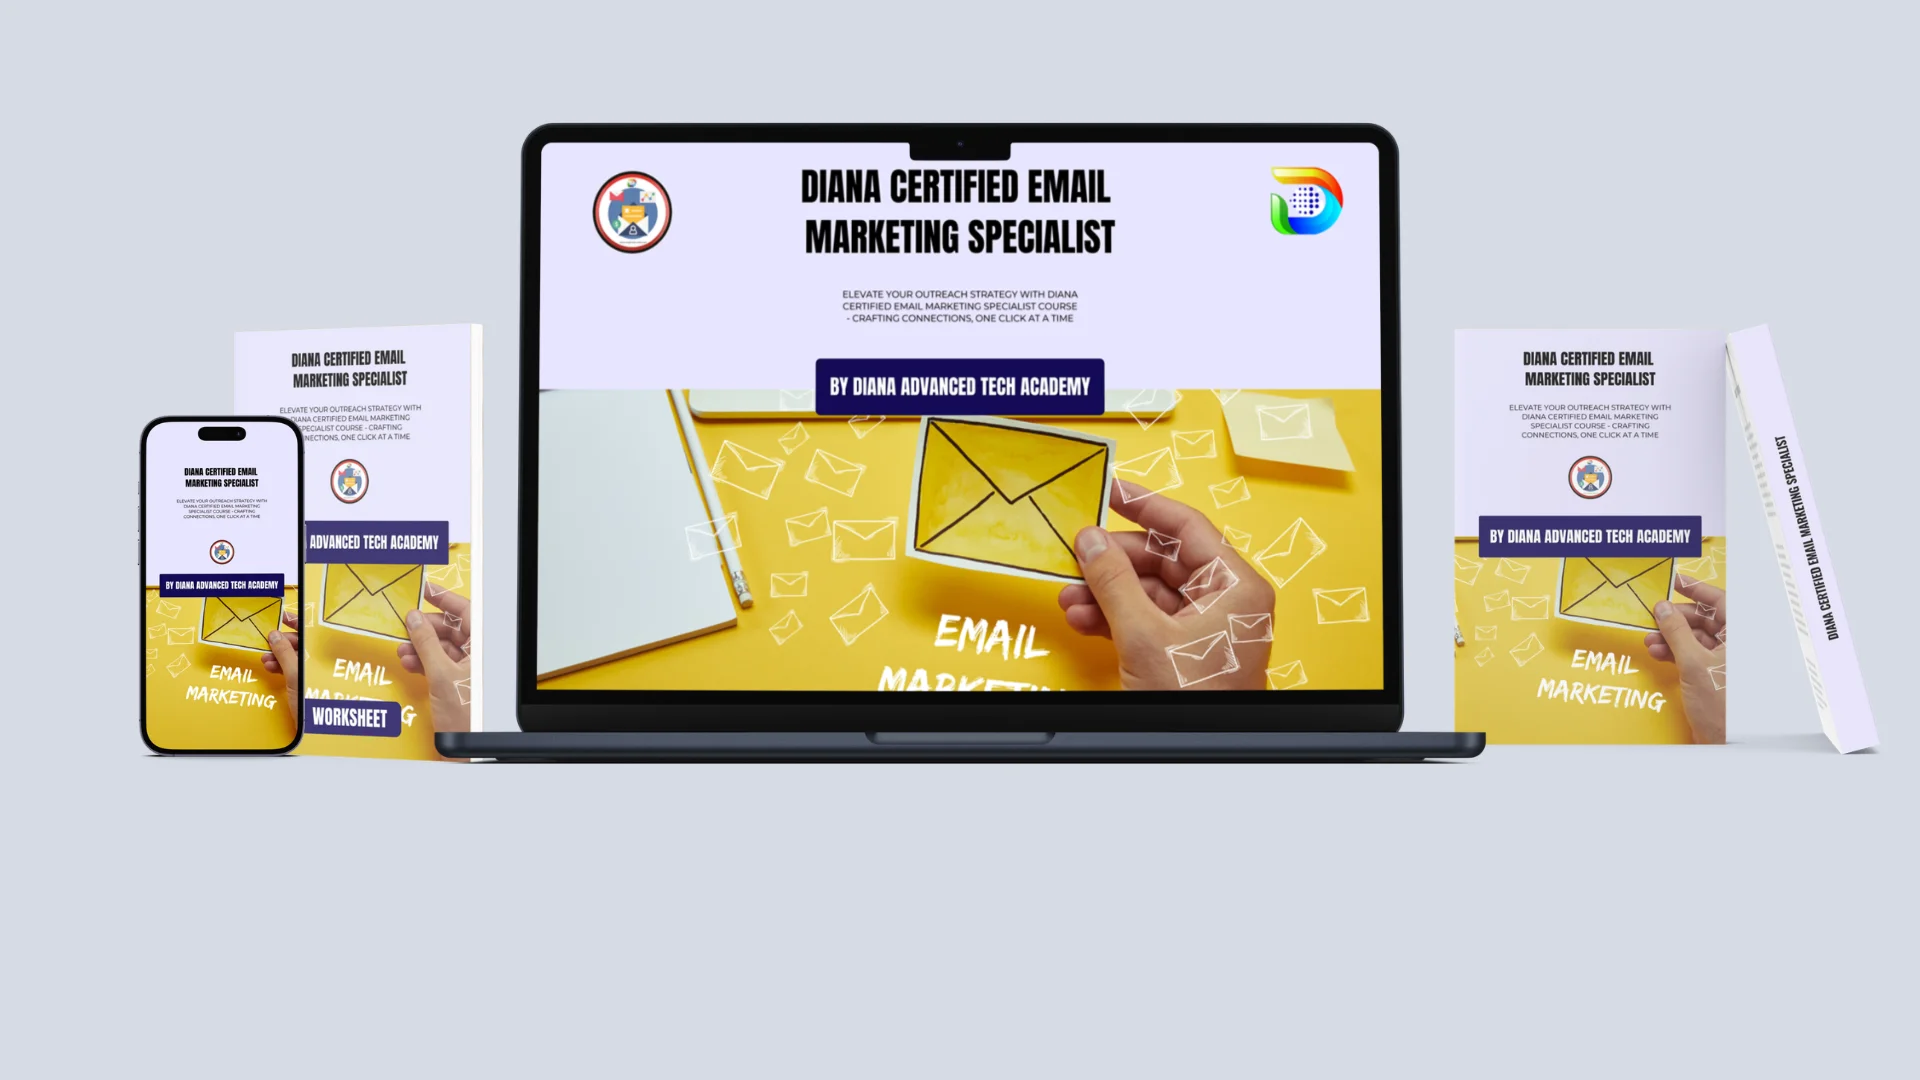 Diana Certified Email Marketing Specialist